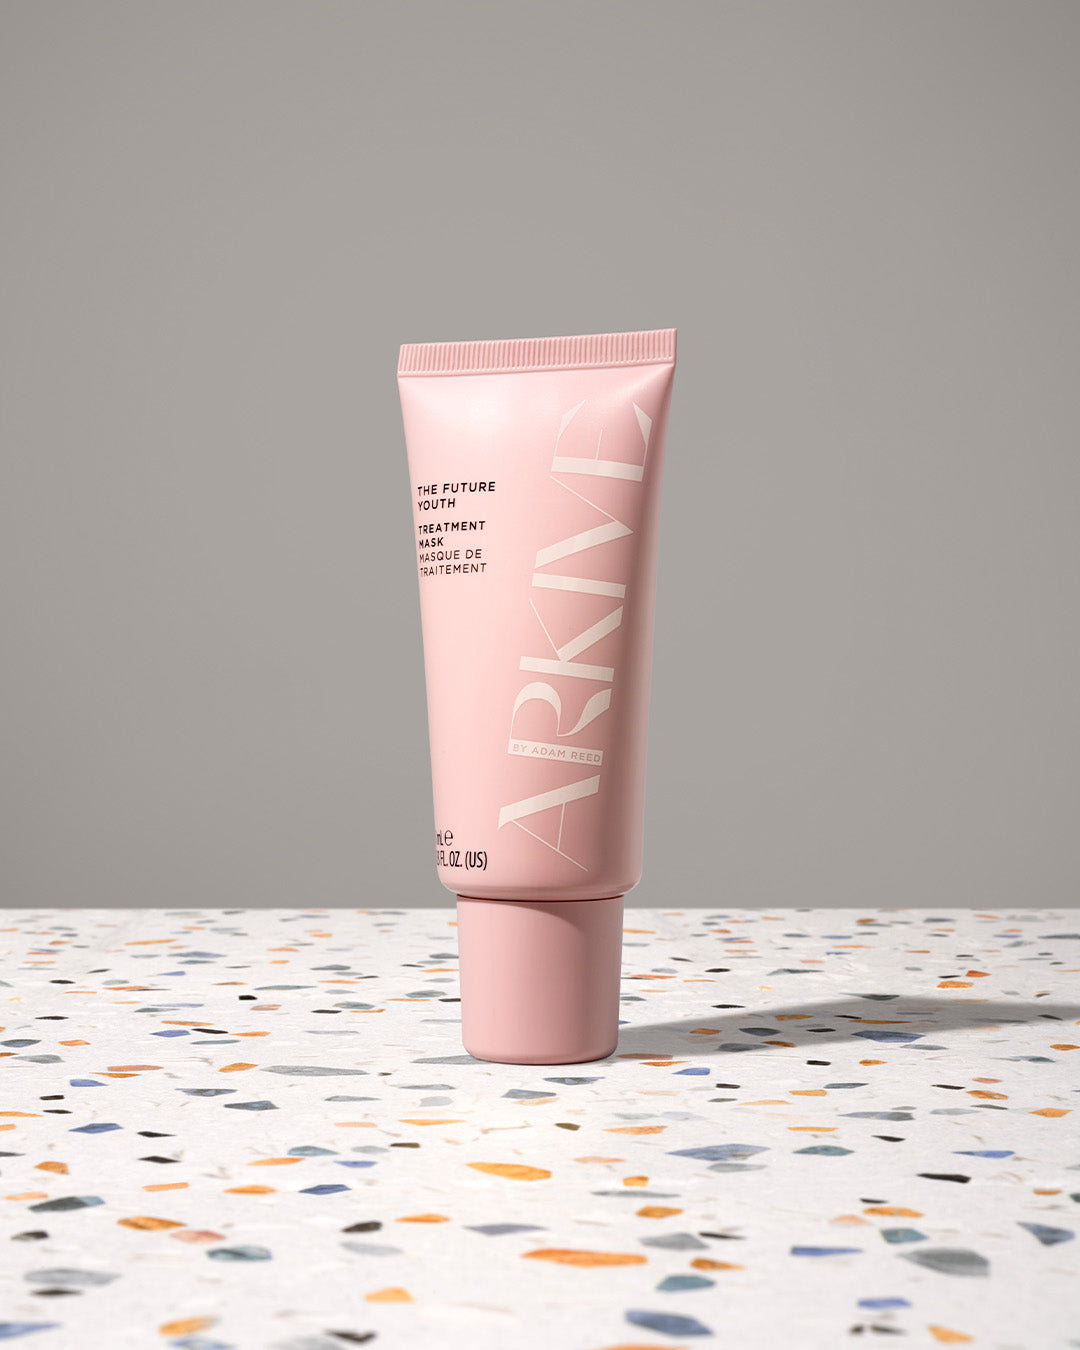 A mini bottle of Arkive's The Future Youth hair treatment mask on a patterned table